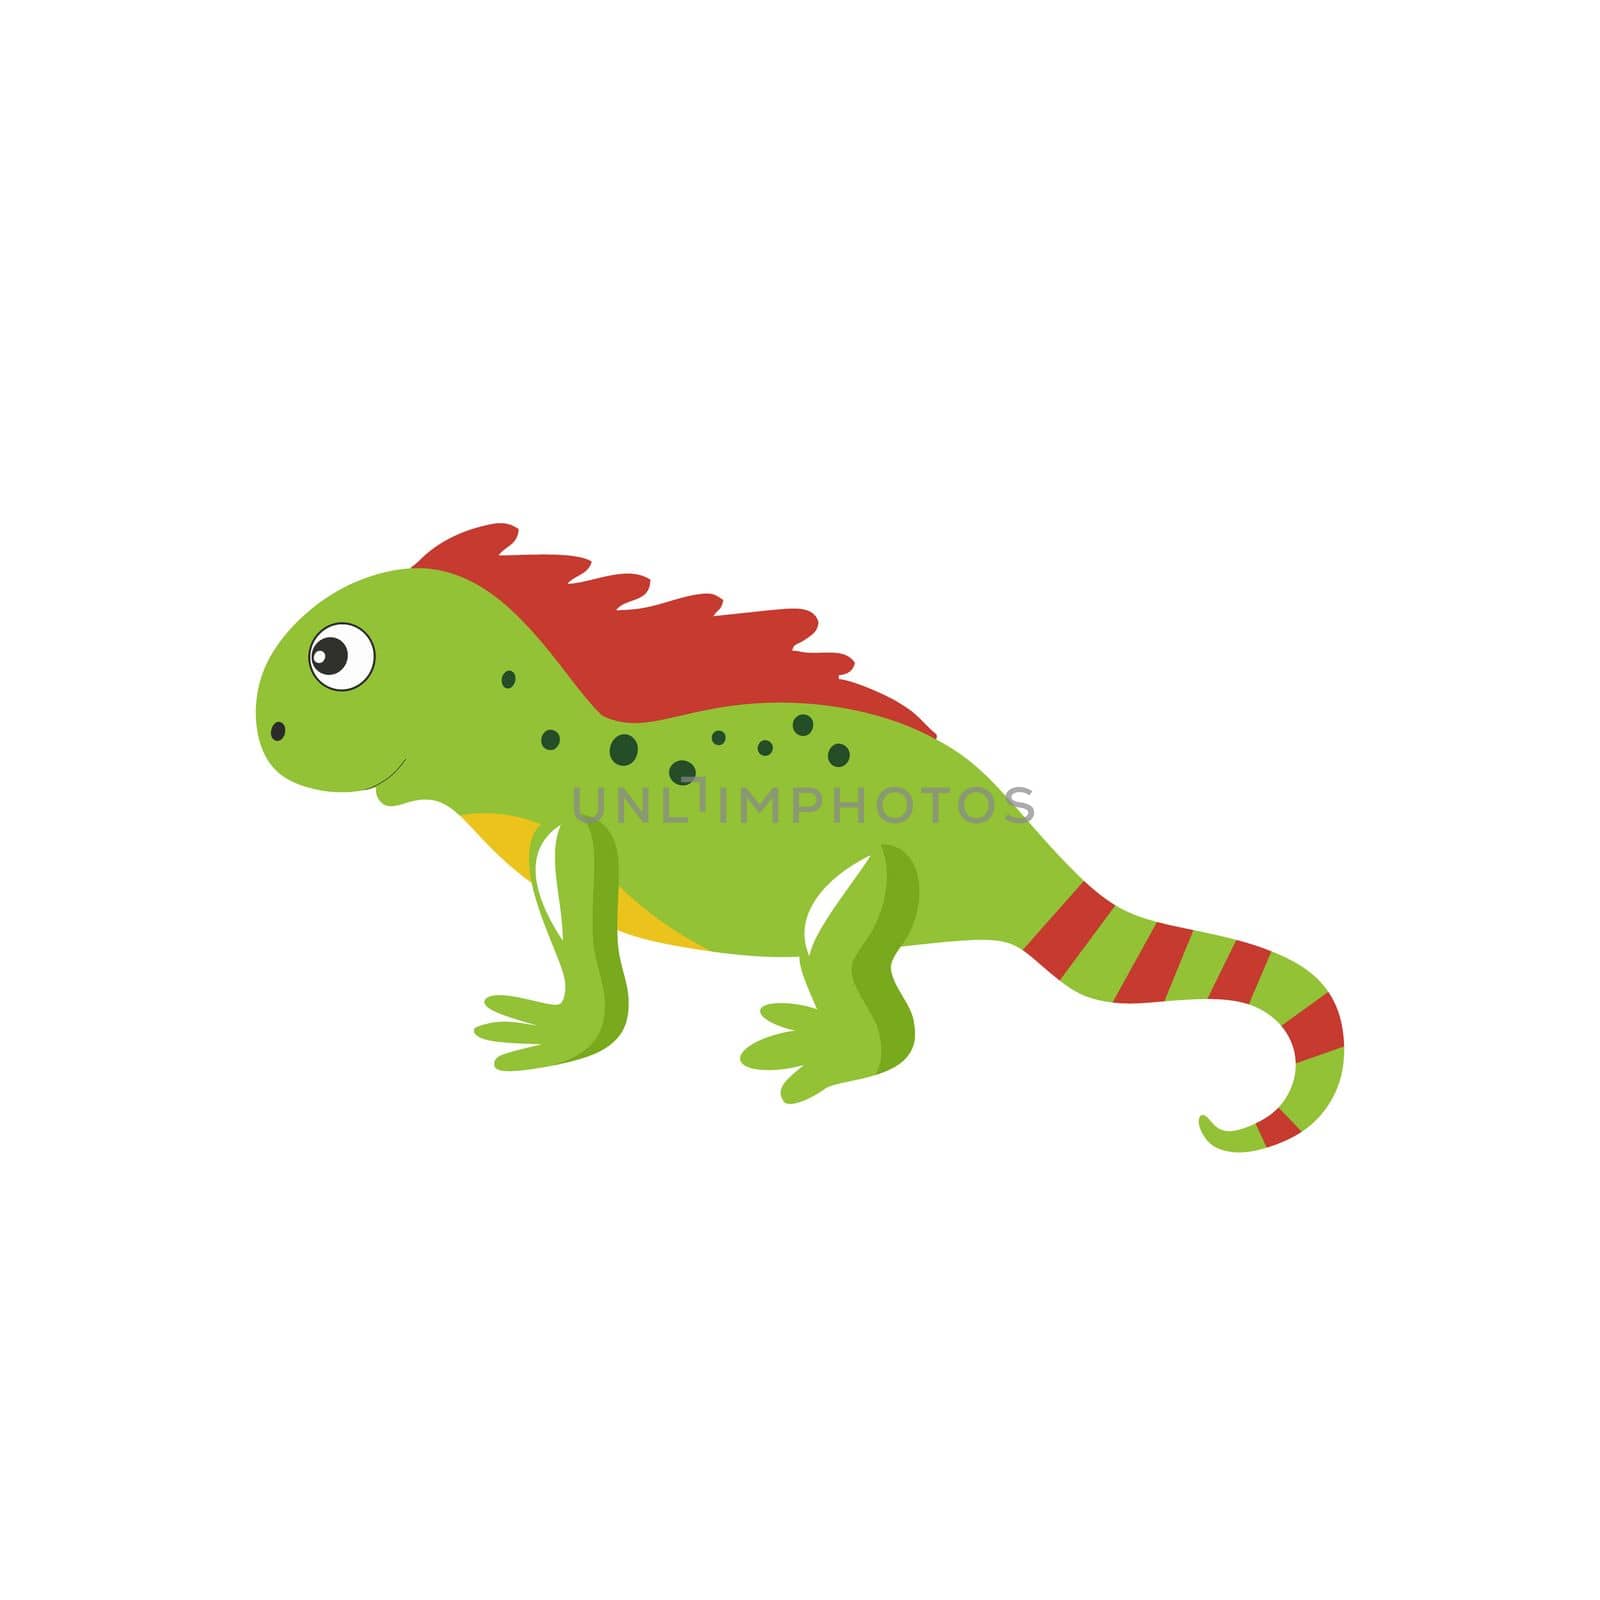 Iguana lizard isolated on a white background. Children's cartoon vector illustration for alphabet with animals. Snakes, reptiles, and reptiles. by polinka_art